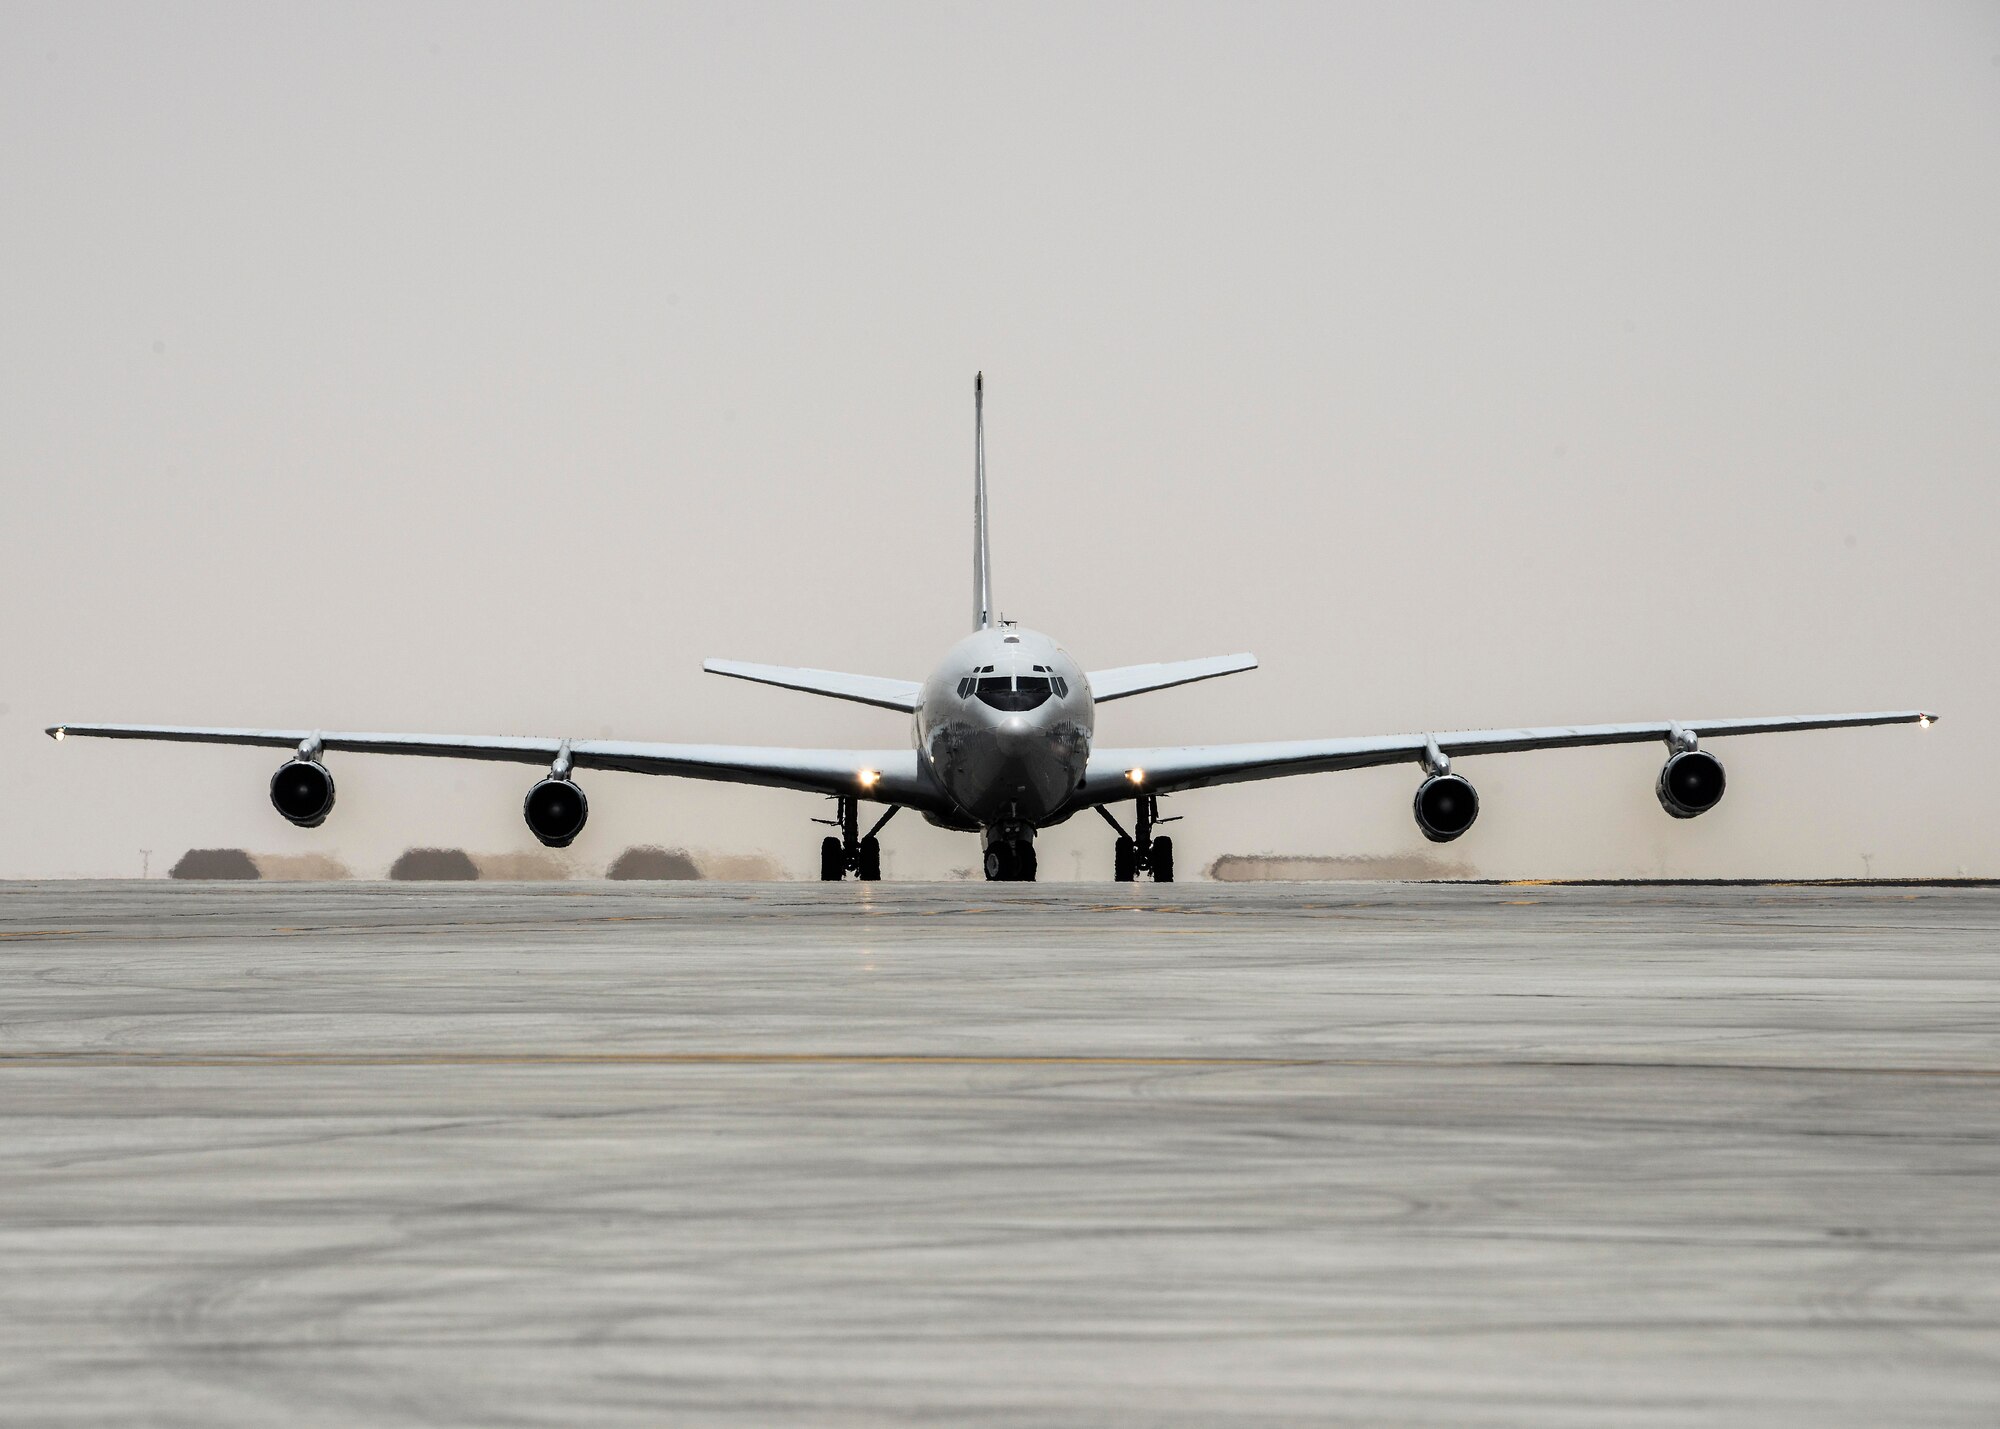 An E-8C Joint Surveillance Target Attack Radar System taxis down the runway after completing a mission June 7, 2016, at Al Udeid Air Base, Qatar. The E-8C JSTARS aircraft uses its radar systems to support ground units and direct air support throughout the area of responsibility. (U.S. Air Force photo/Senior Airman Janelle Patiño/Released)